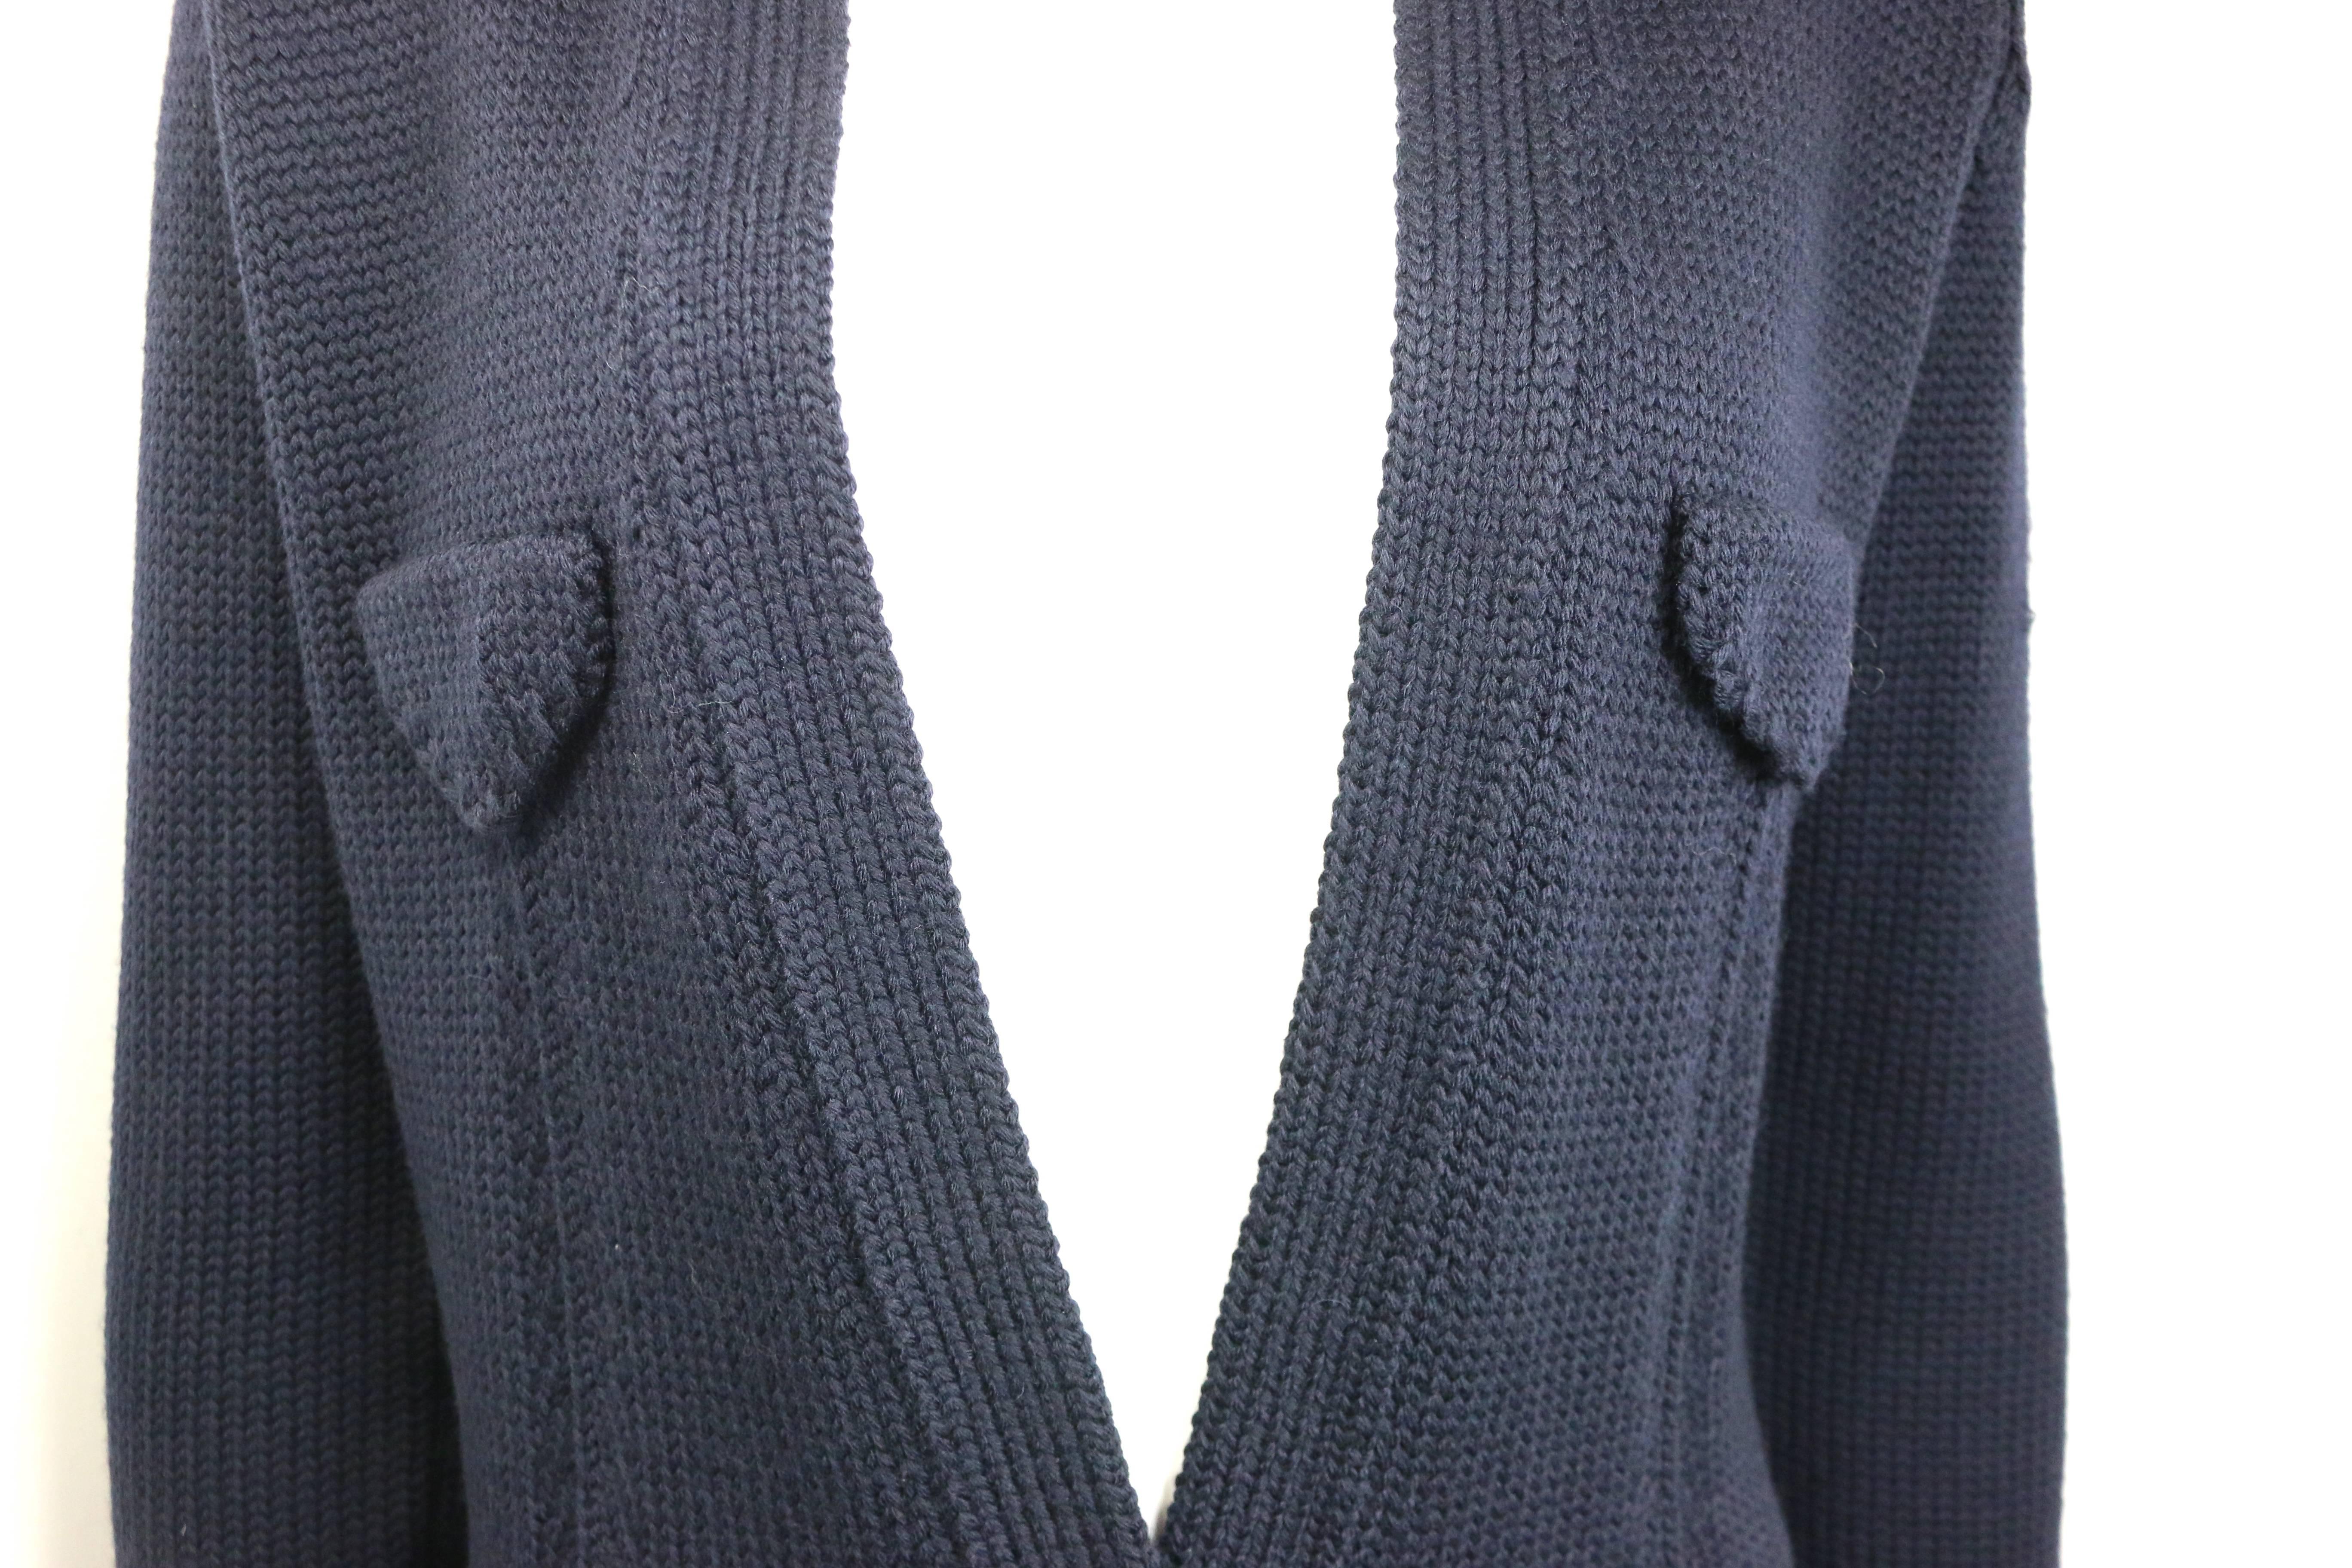 - Vintage Gucci by Tom Ford dark navy wool knitted cardigan jacket from Fall 1996 collection. 

- Mandarin collar. 

- Epaulette Shoulder. 

- Four front pockets. Two flap open pockets. 

- Two buttons closure. 

- Shoulder Pad. 

- Size L. 

- 100%